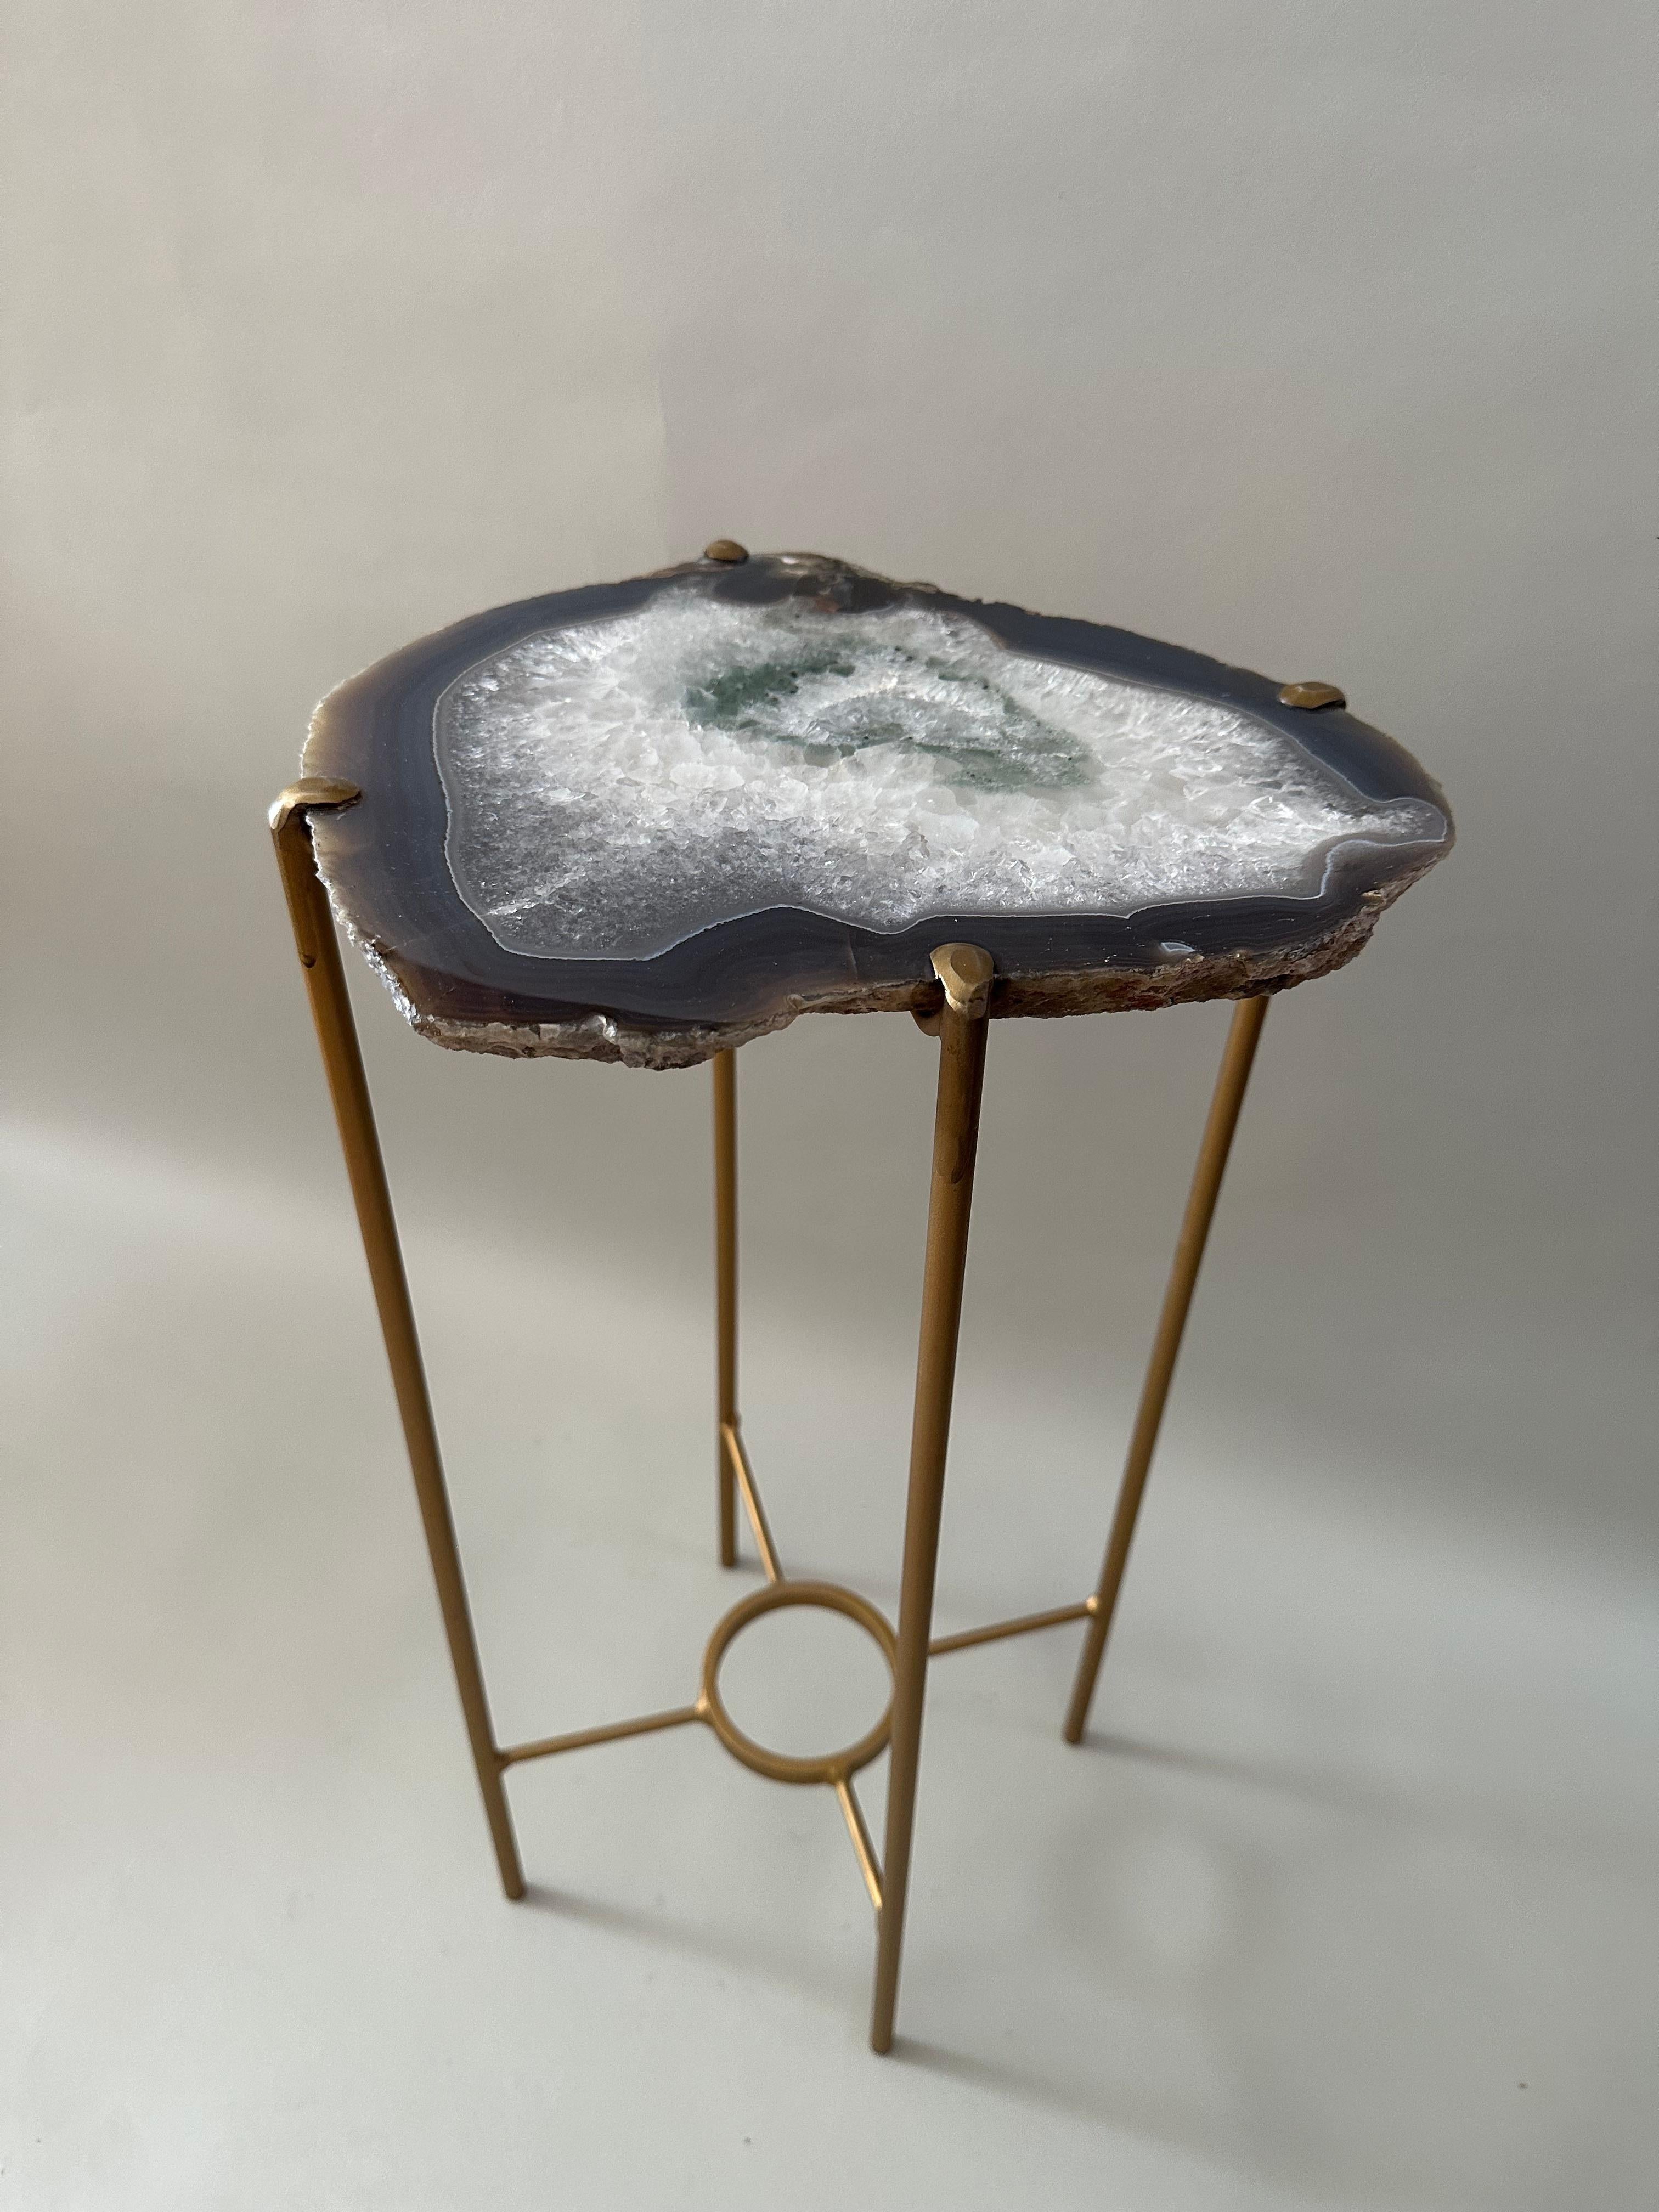 Unusual Modern Handcrafted Geode Drinks Table. Quartzite top with gilt steel base. Dark Green to Crystal center edged in dark brownish Blues